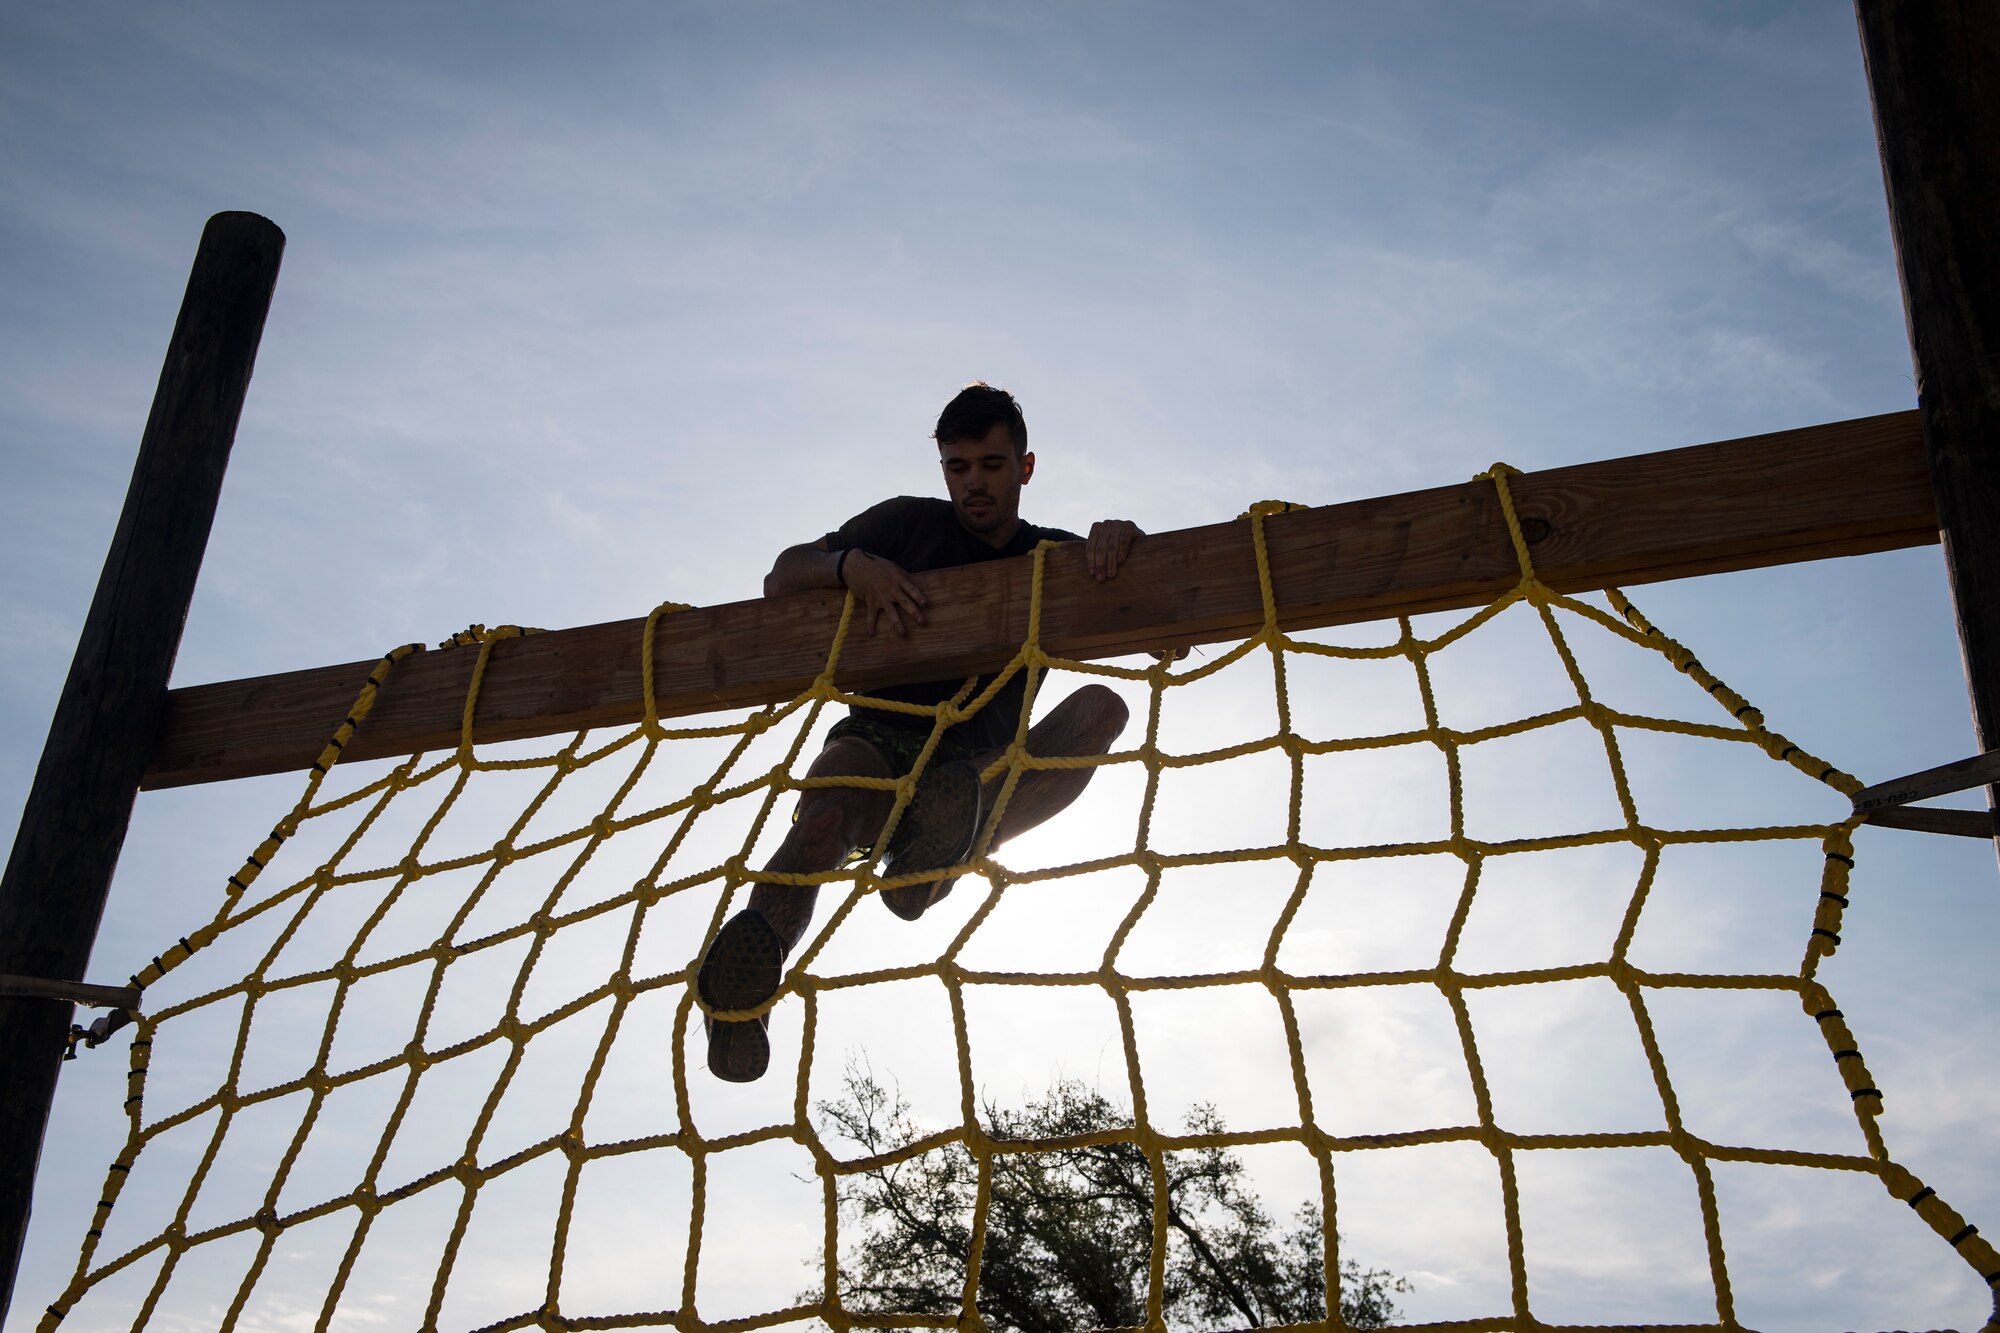 A Moody Mud Run participant climbs a rope obstacle, May 5, 2018, in Ray City, Ga. Participants trekked 4.6 miles through the mud, water and 29 obstacles that made up the course. This is the fifth year Moody has hosted the event and more than 800 patrons participated. (U.S. Air Force photo by Senior Airman Janiqua P. Robinson)